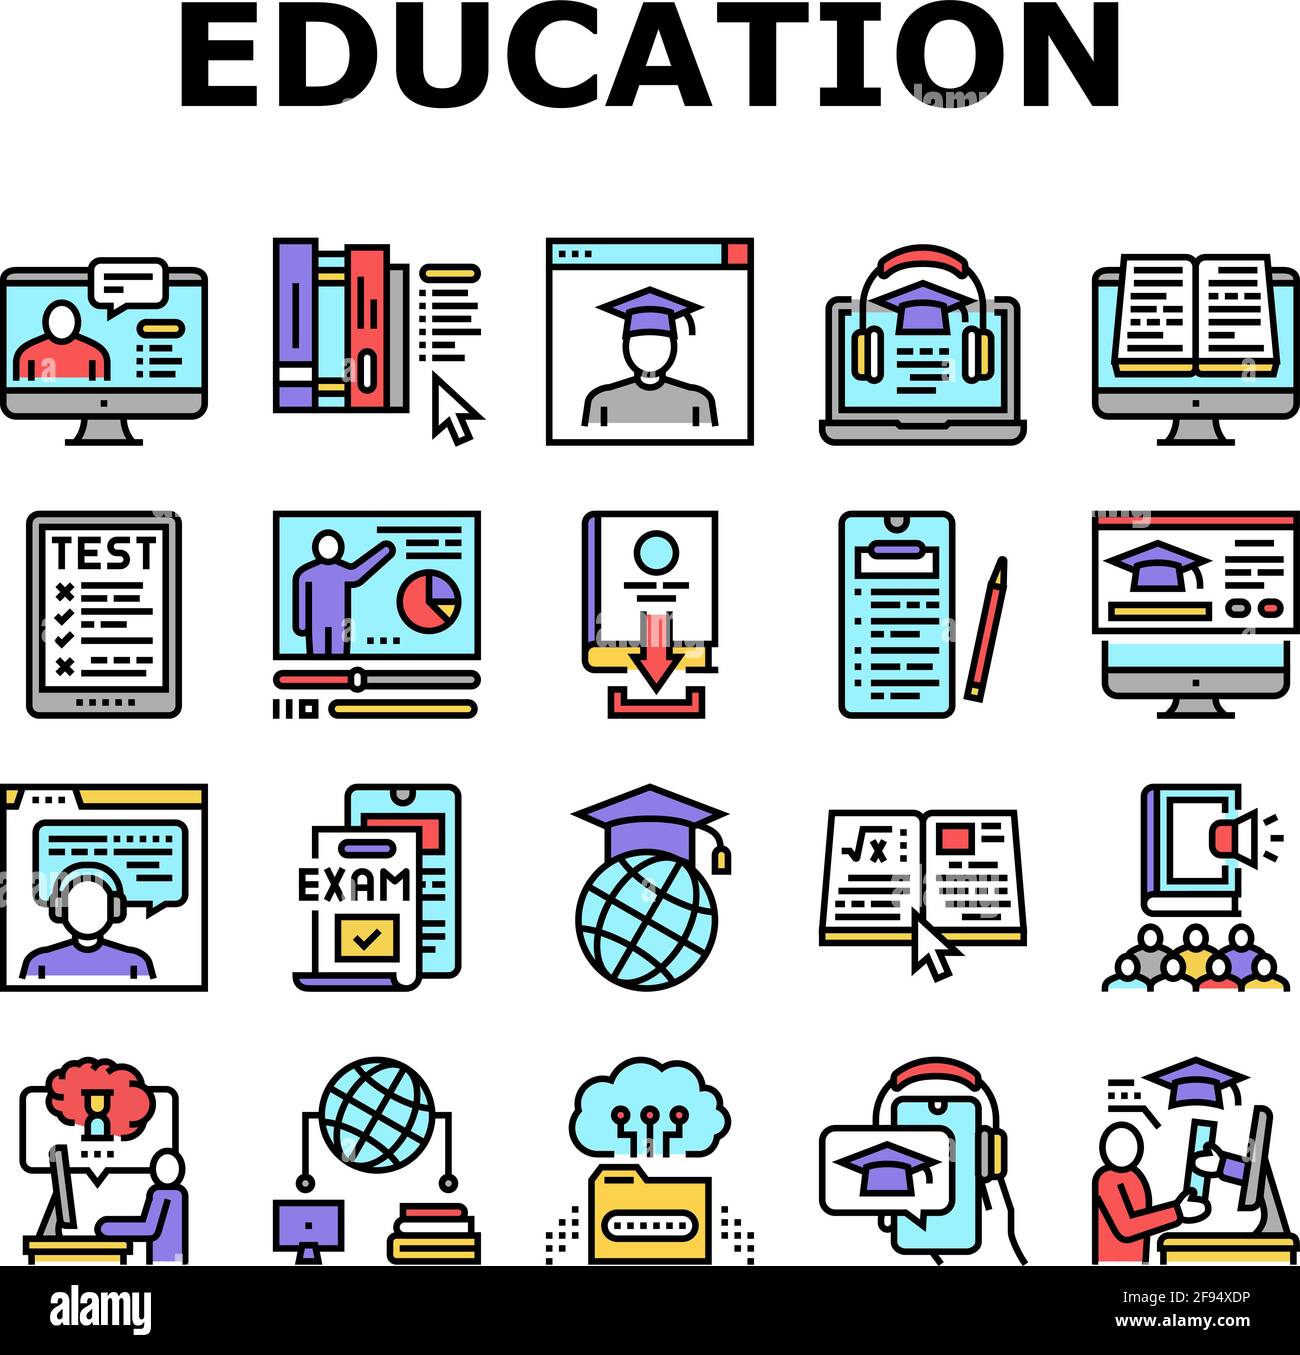 Online Education Book Collection Icons Set Vector Stock Vector